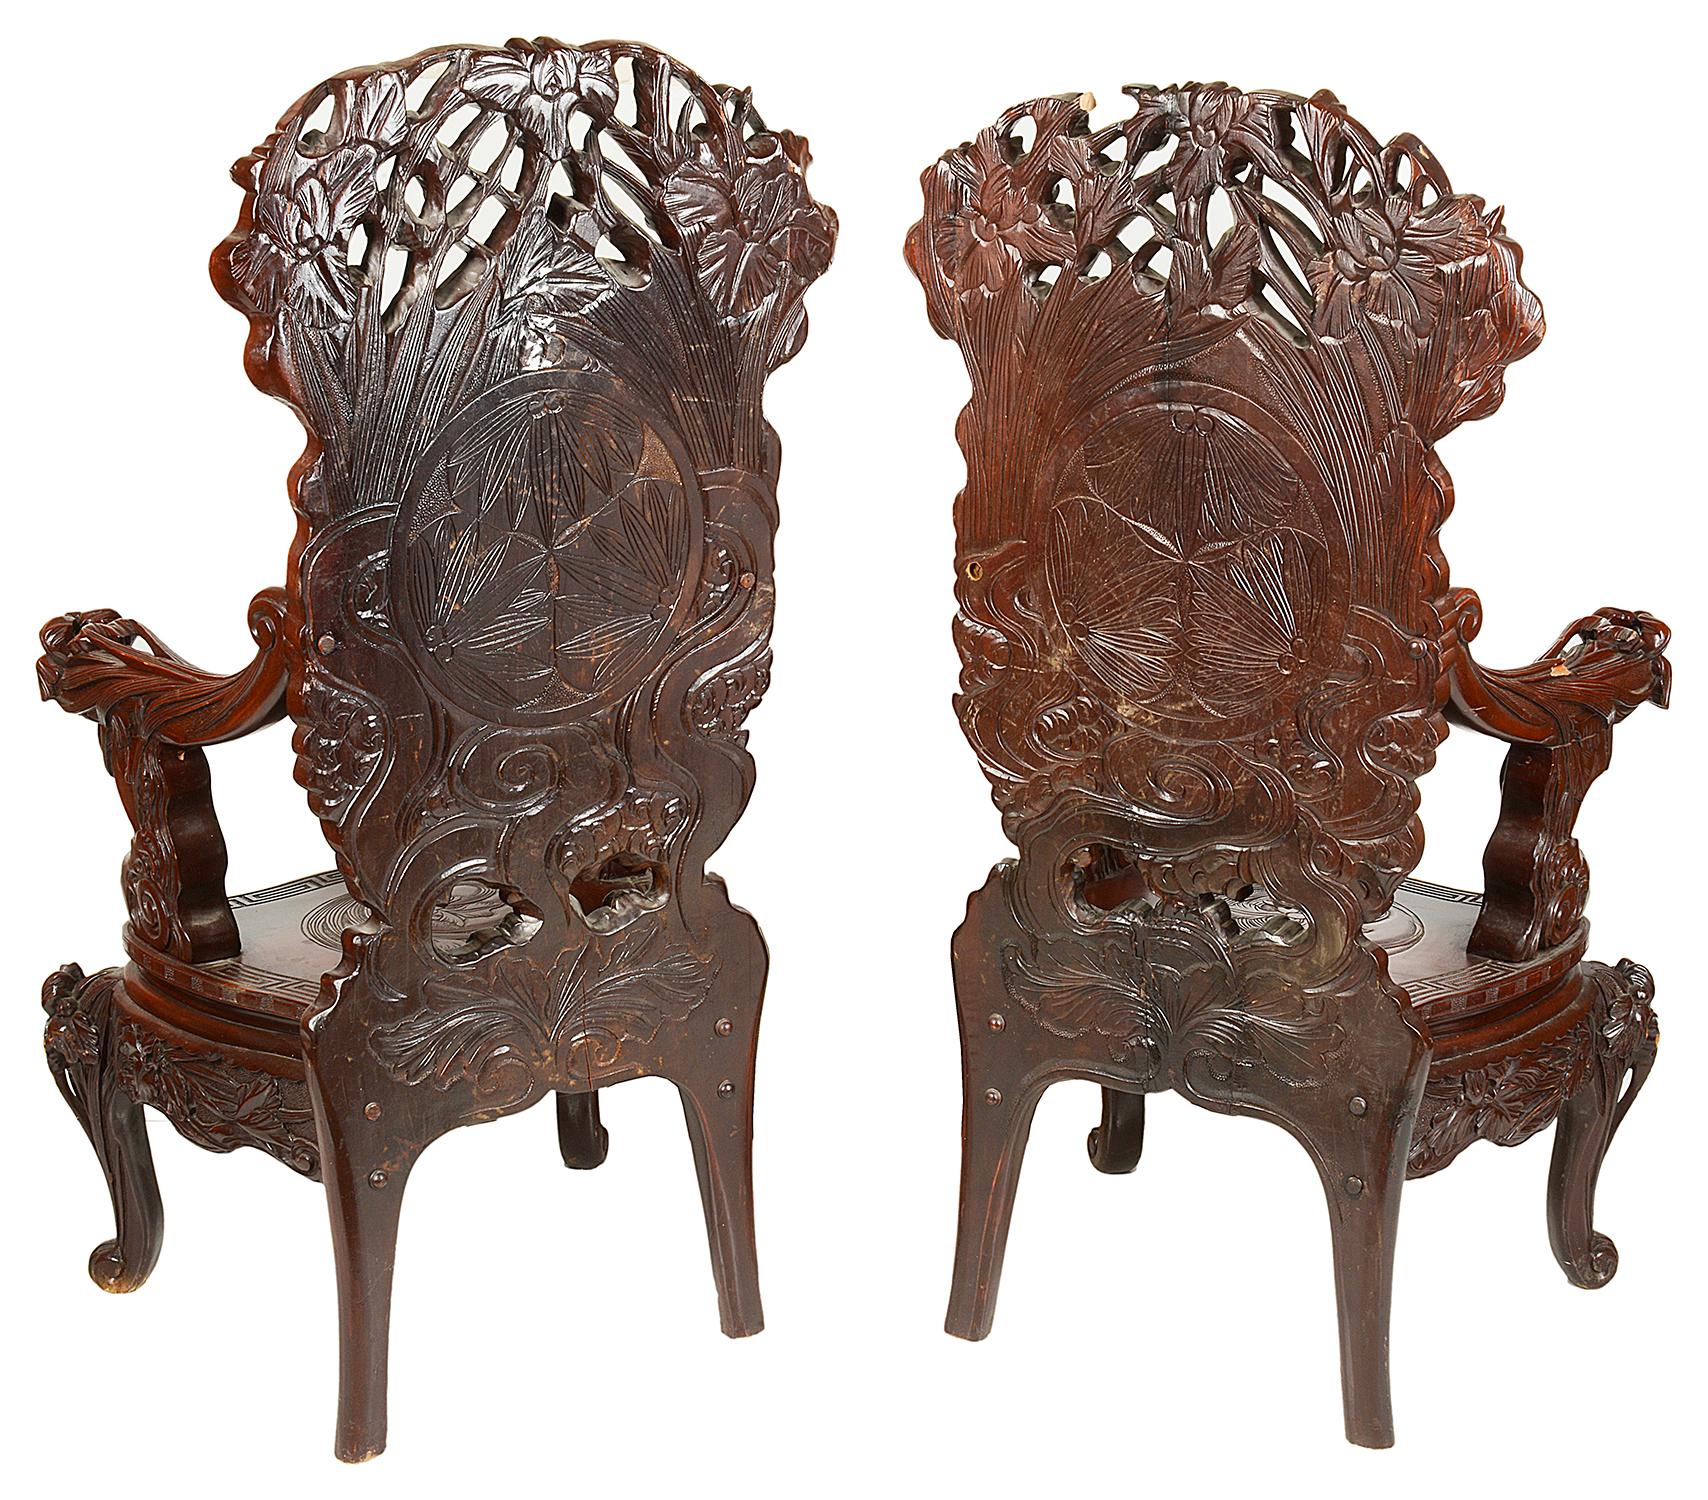 A very impressive large pair of Japanese carved softwood armchairs, each depicting carved exotic flowers and foliage.